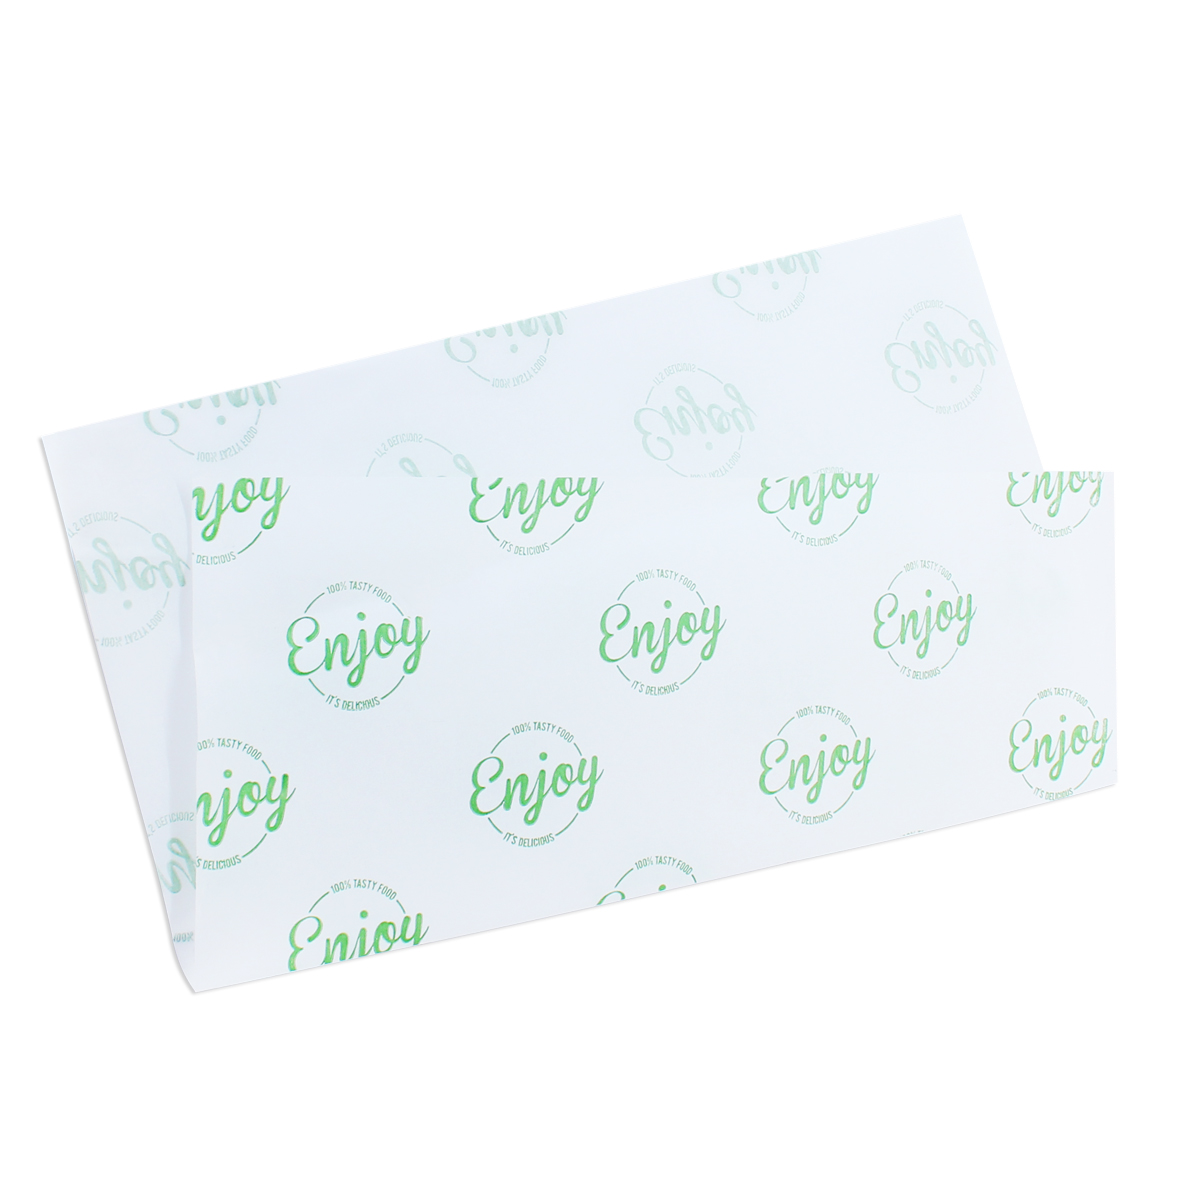 Wrapping sheets - Enjoy